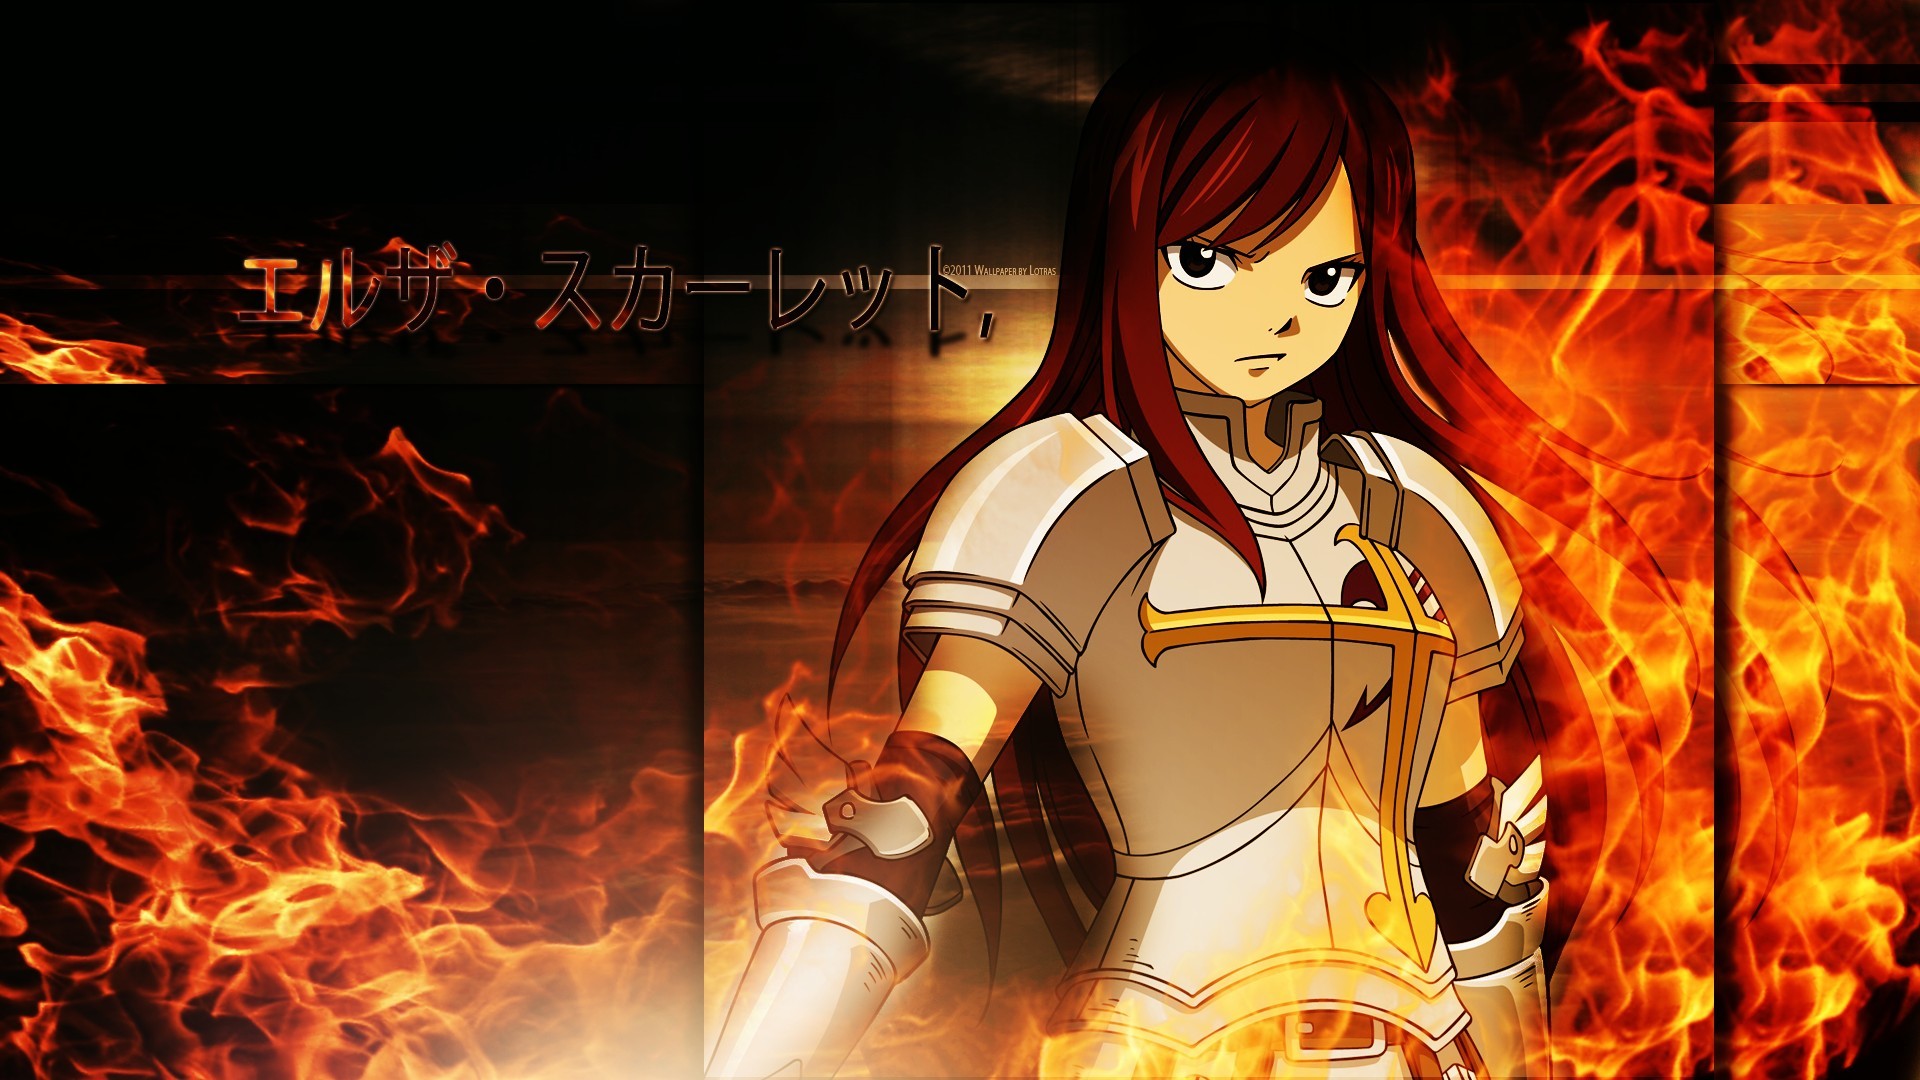 1920x1080 Tags: Anime, FAIRY TAIL, Erza Scarlet, Wallpaper, HD Wallpaper